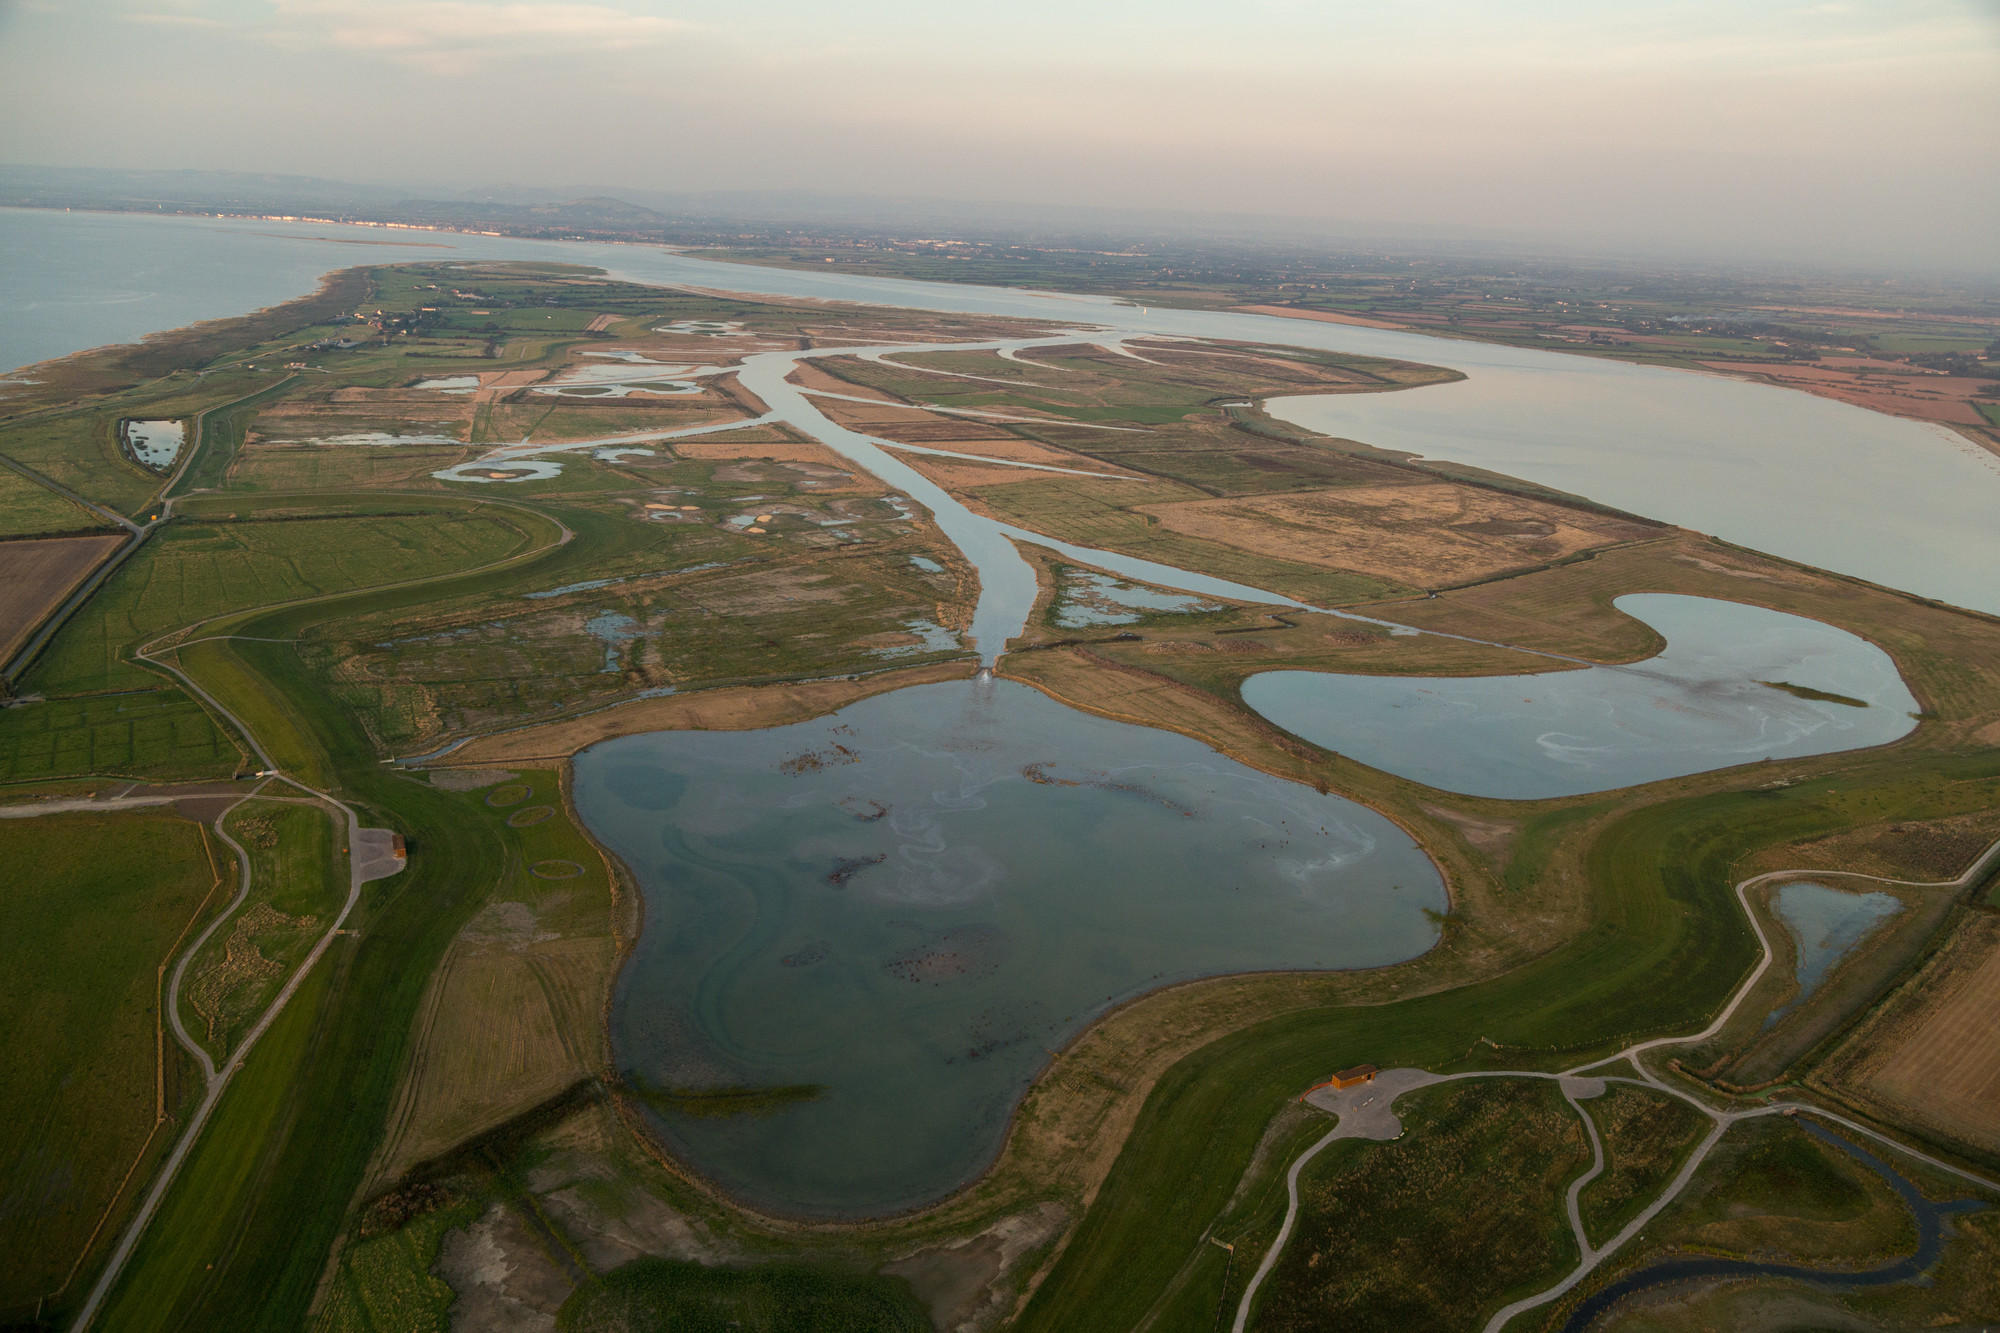 Steart Marshes - a model example